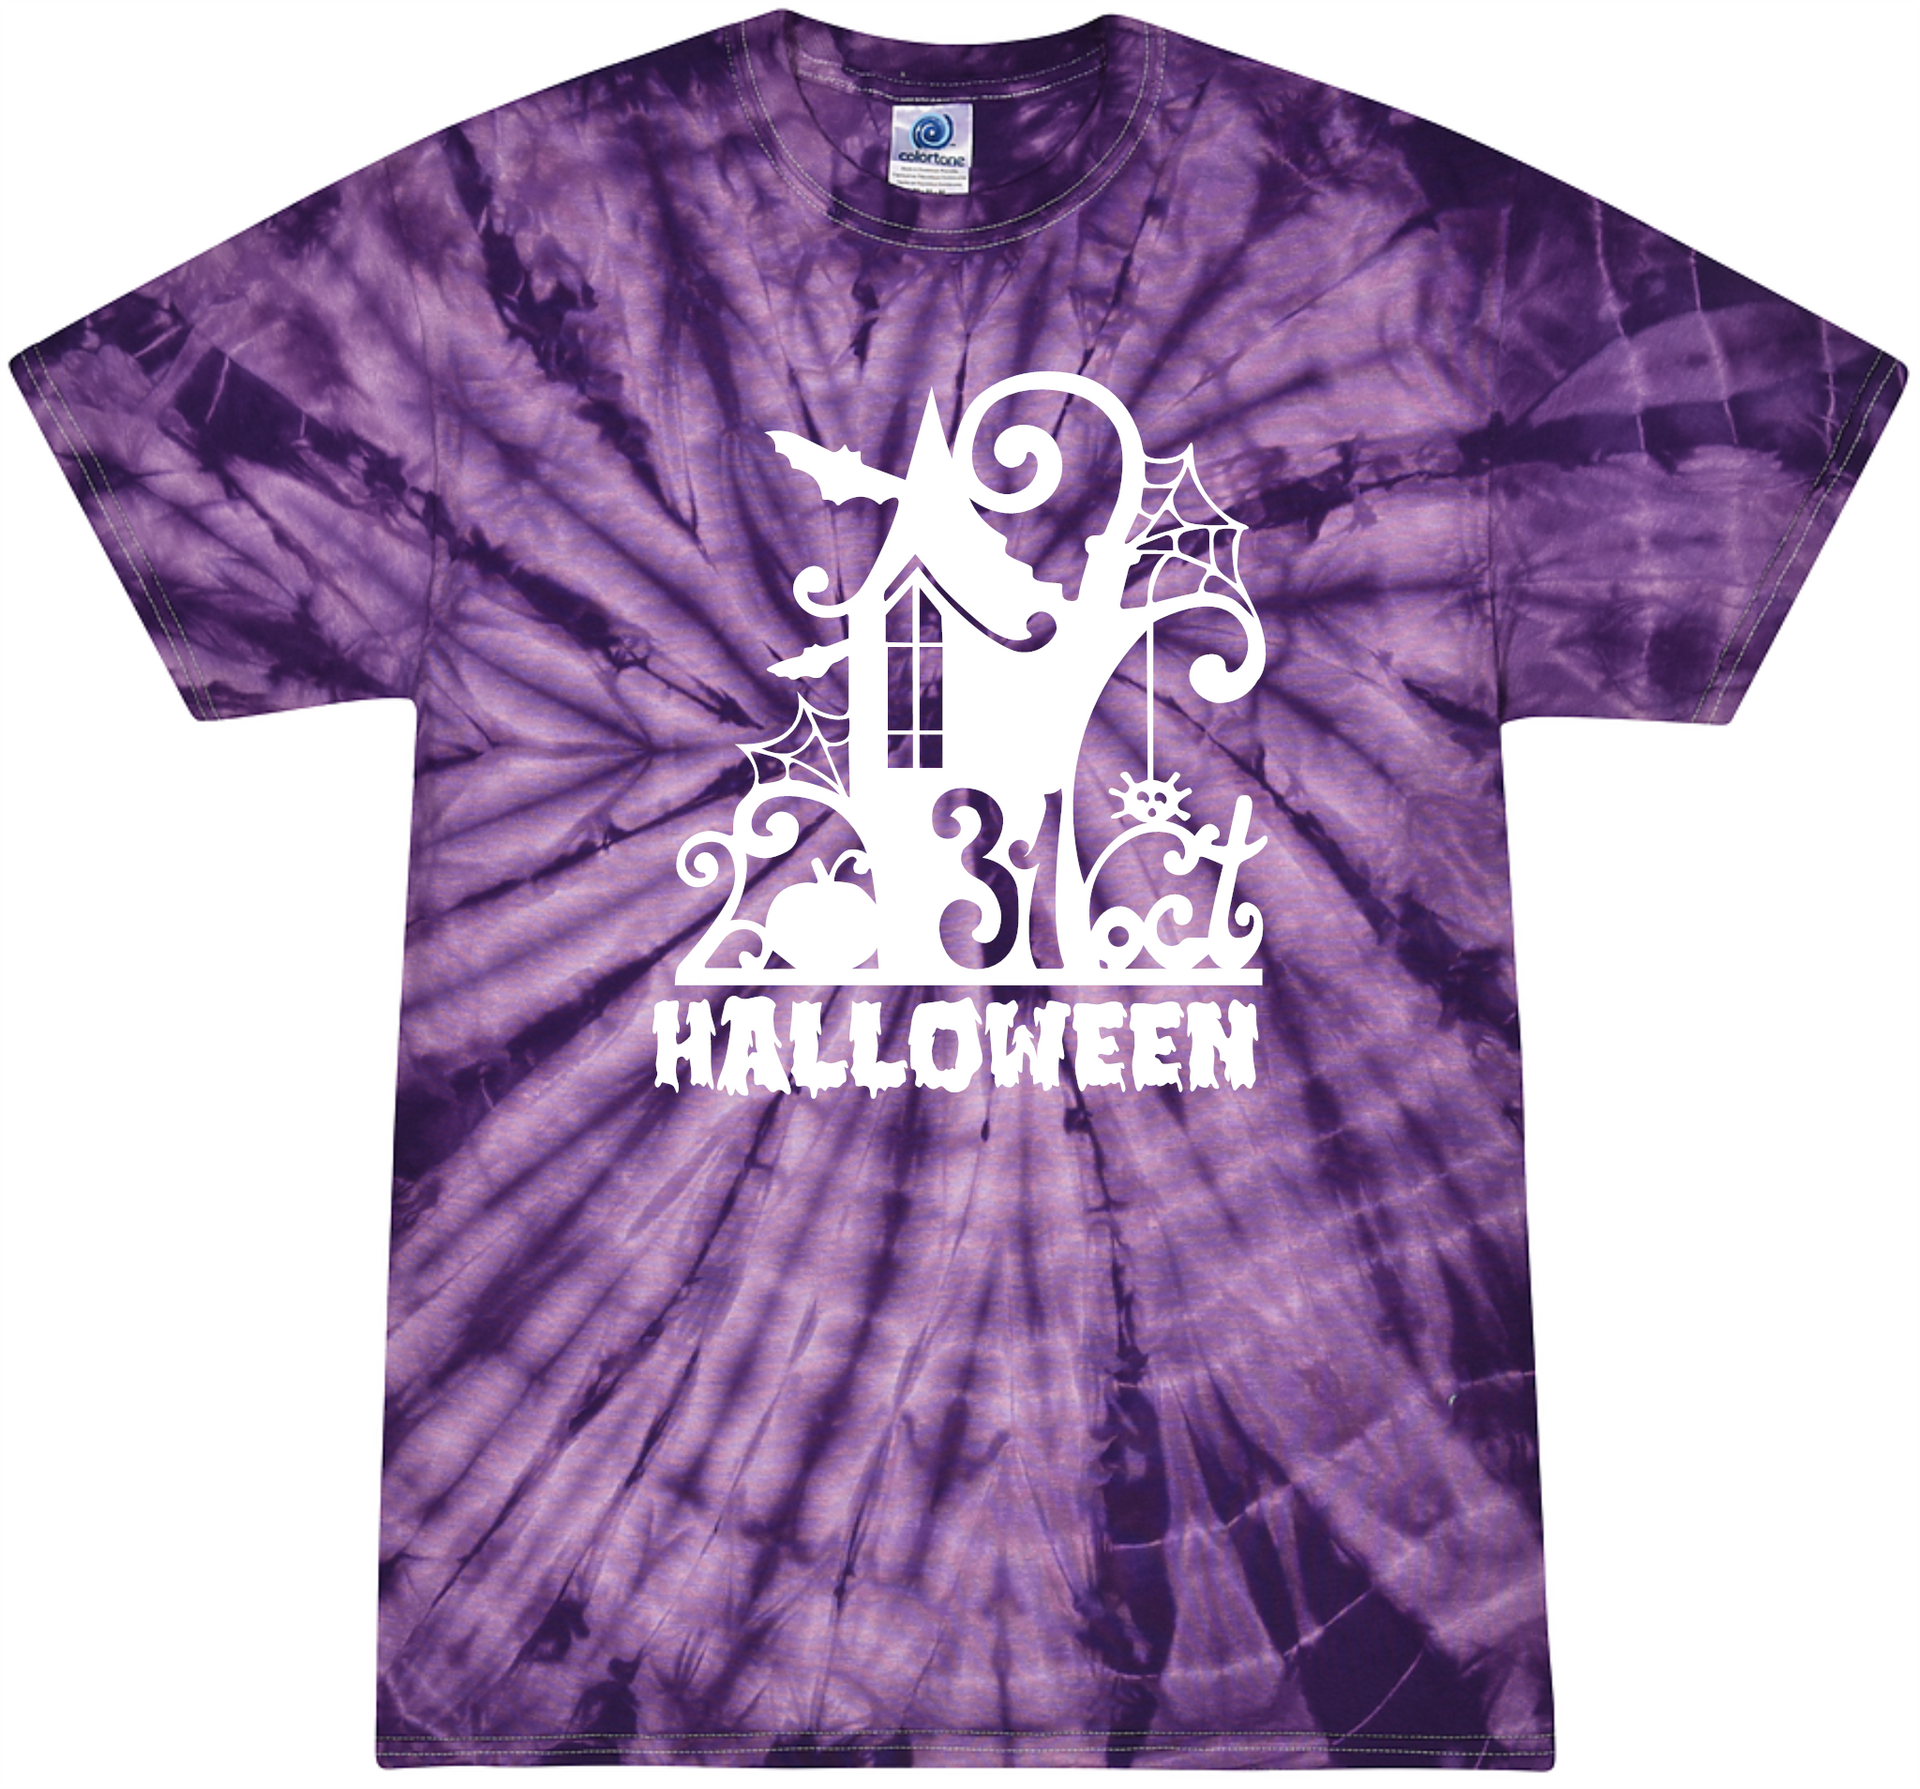 Halloween Tie-dyed Tee Adult Shirt by Akron Pride Custom Tees | Akron Pride Custom Tees